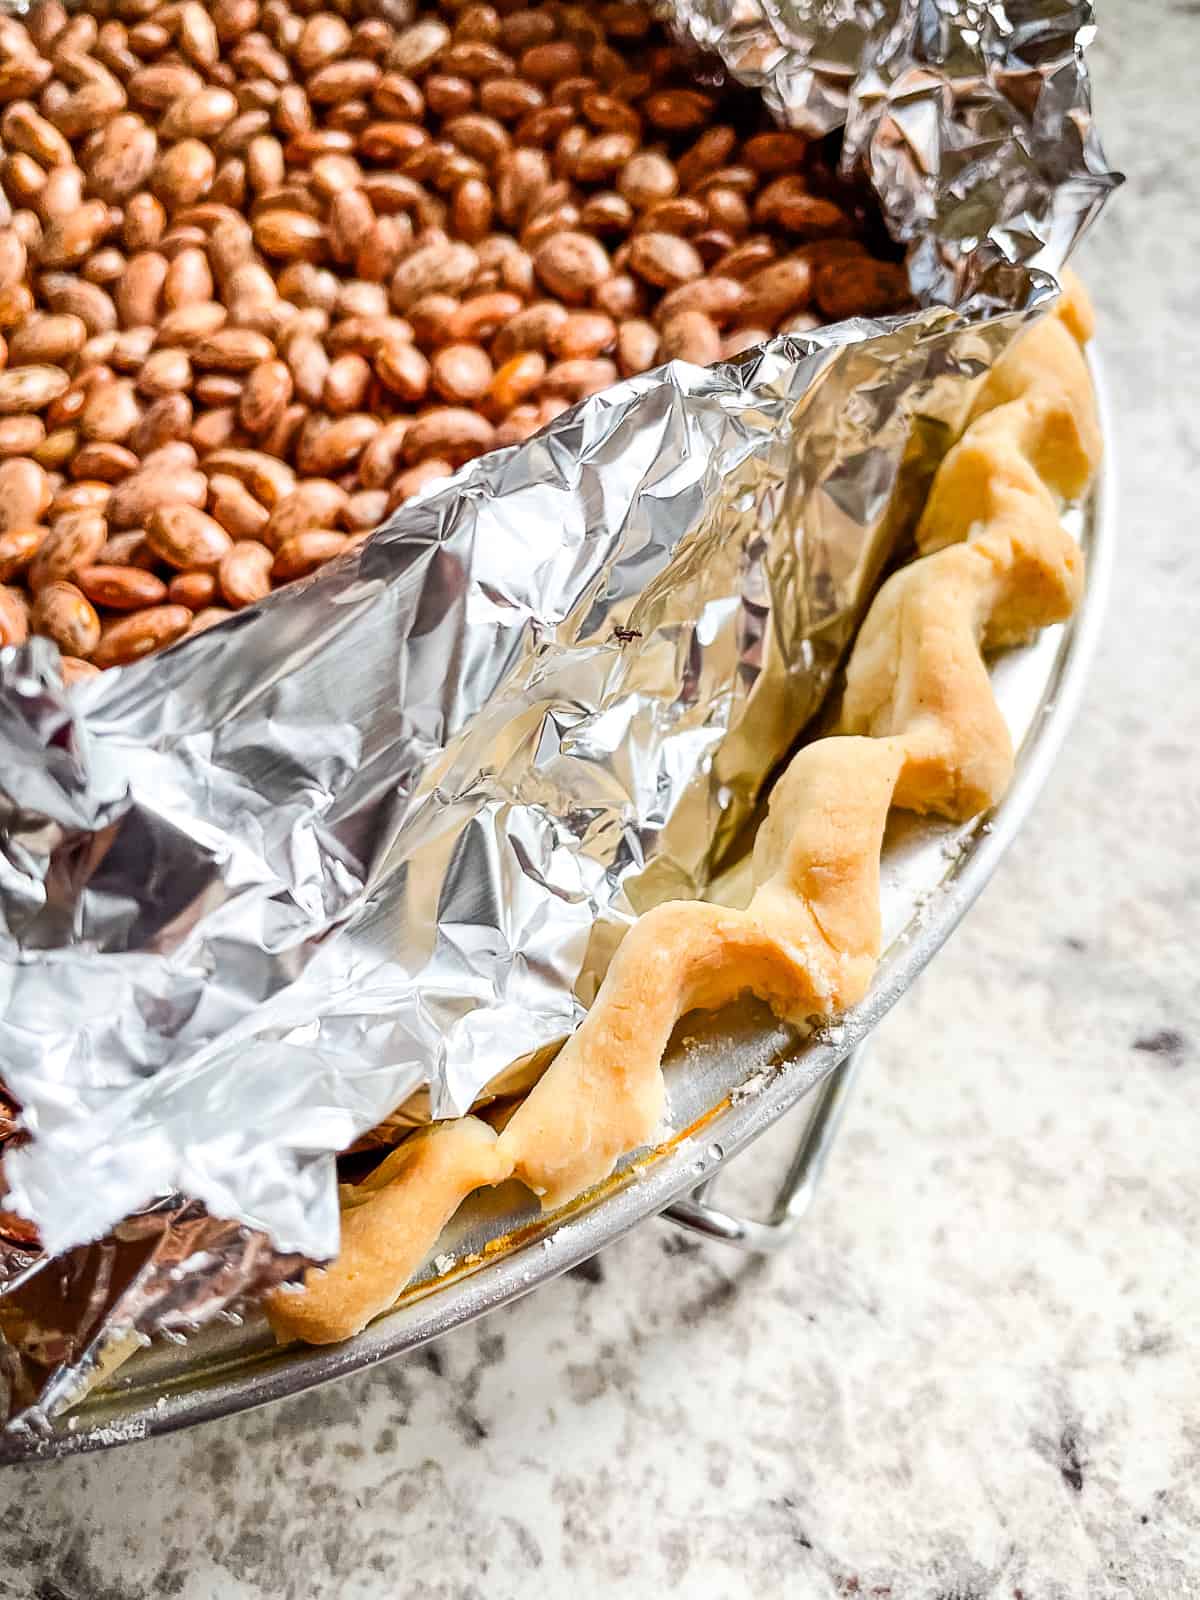 Blind baked gluten-free crust with pinto beans